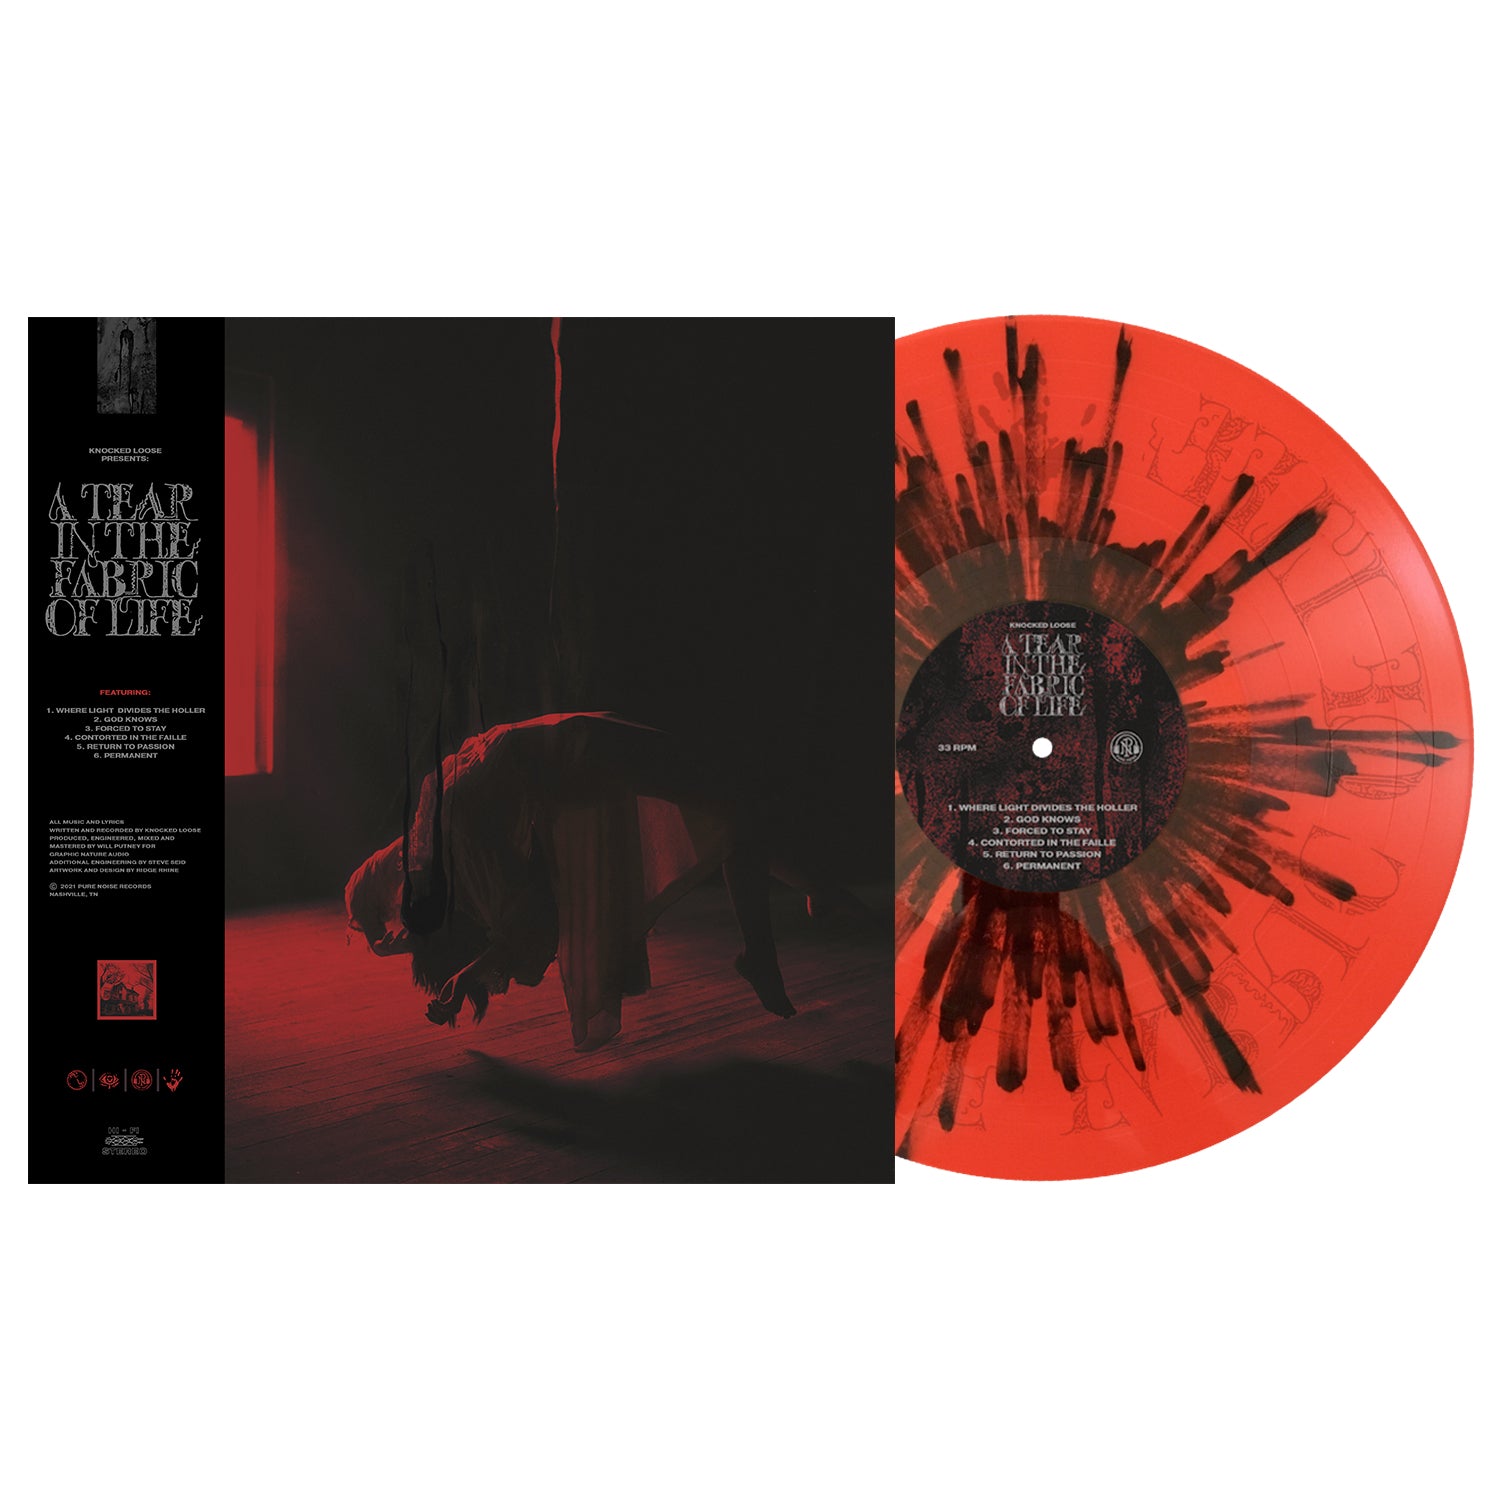 Buy Knocked Loose - A Tear In The Fabric Of Life (Limited, Indie Exclusive, Blood Red with Heavy Black Splatter Vinyl)